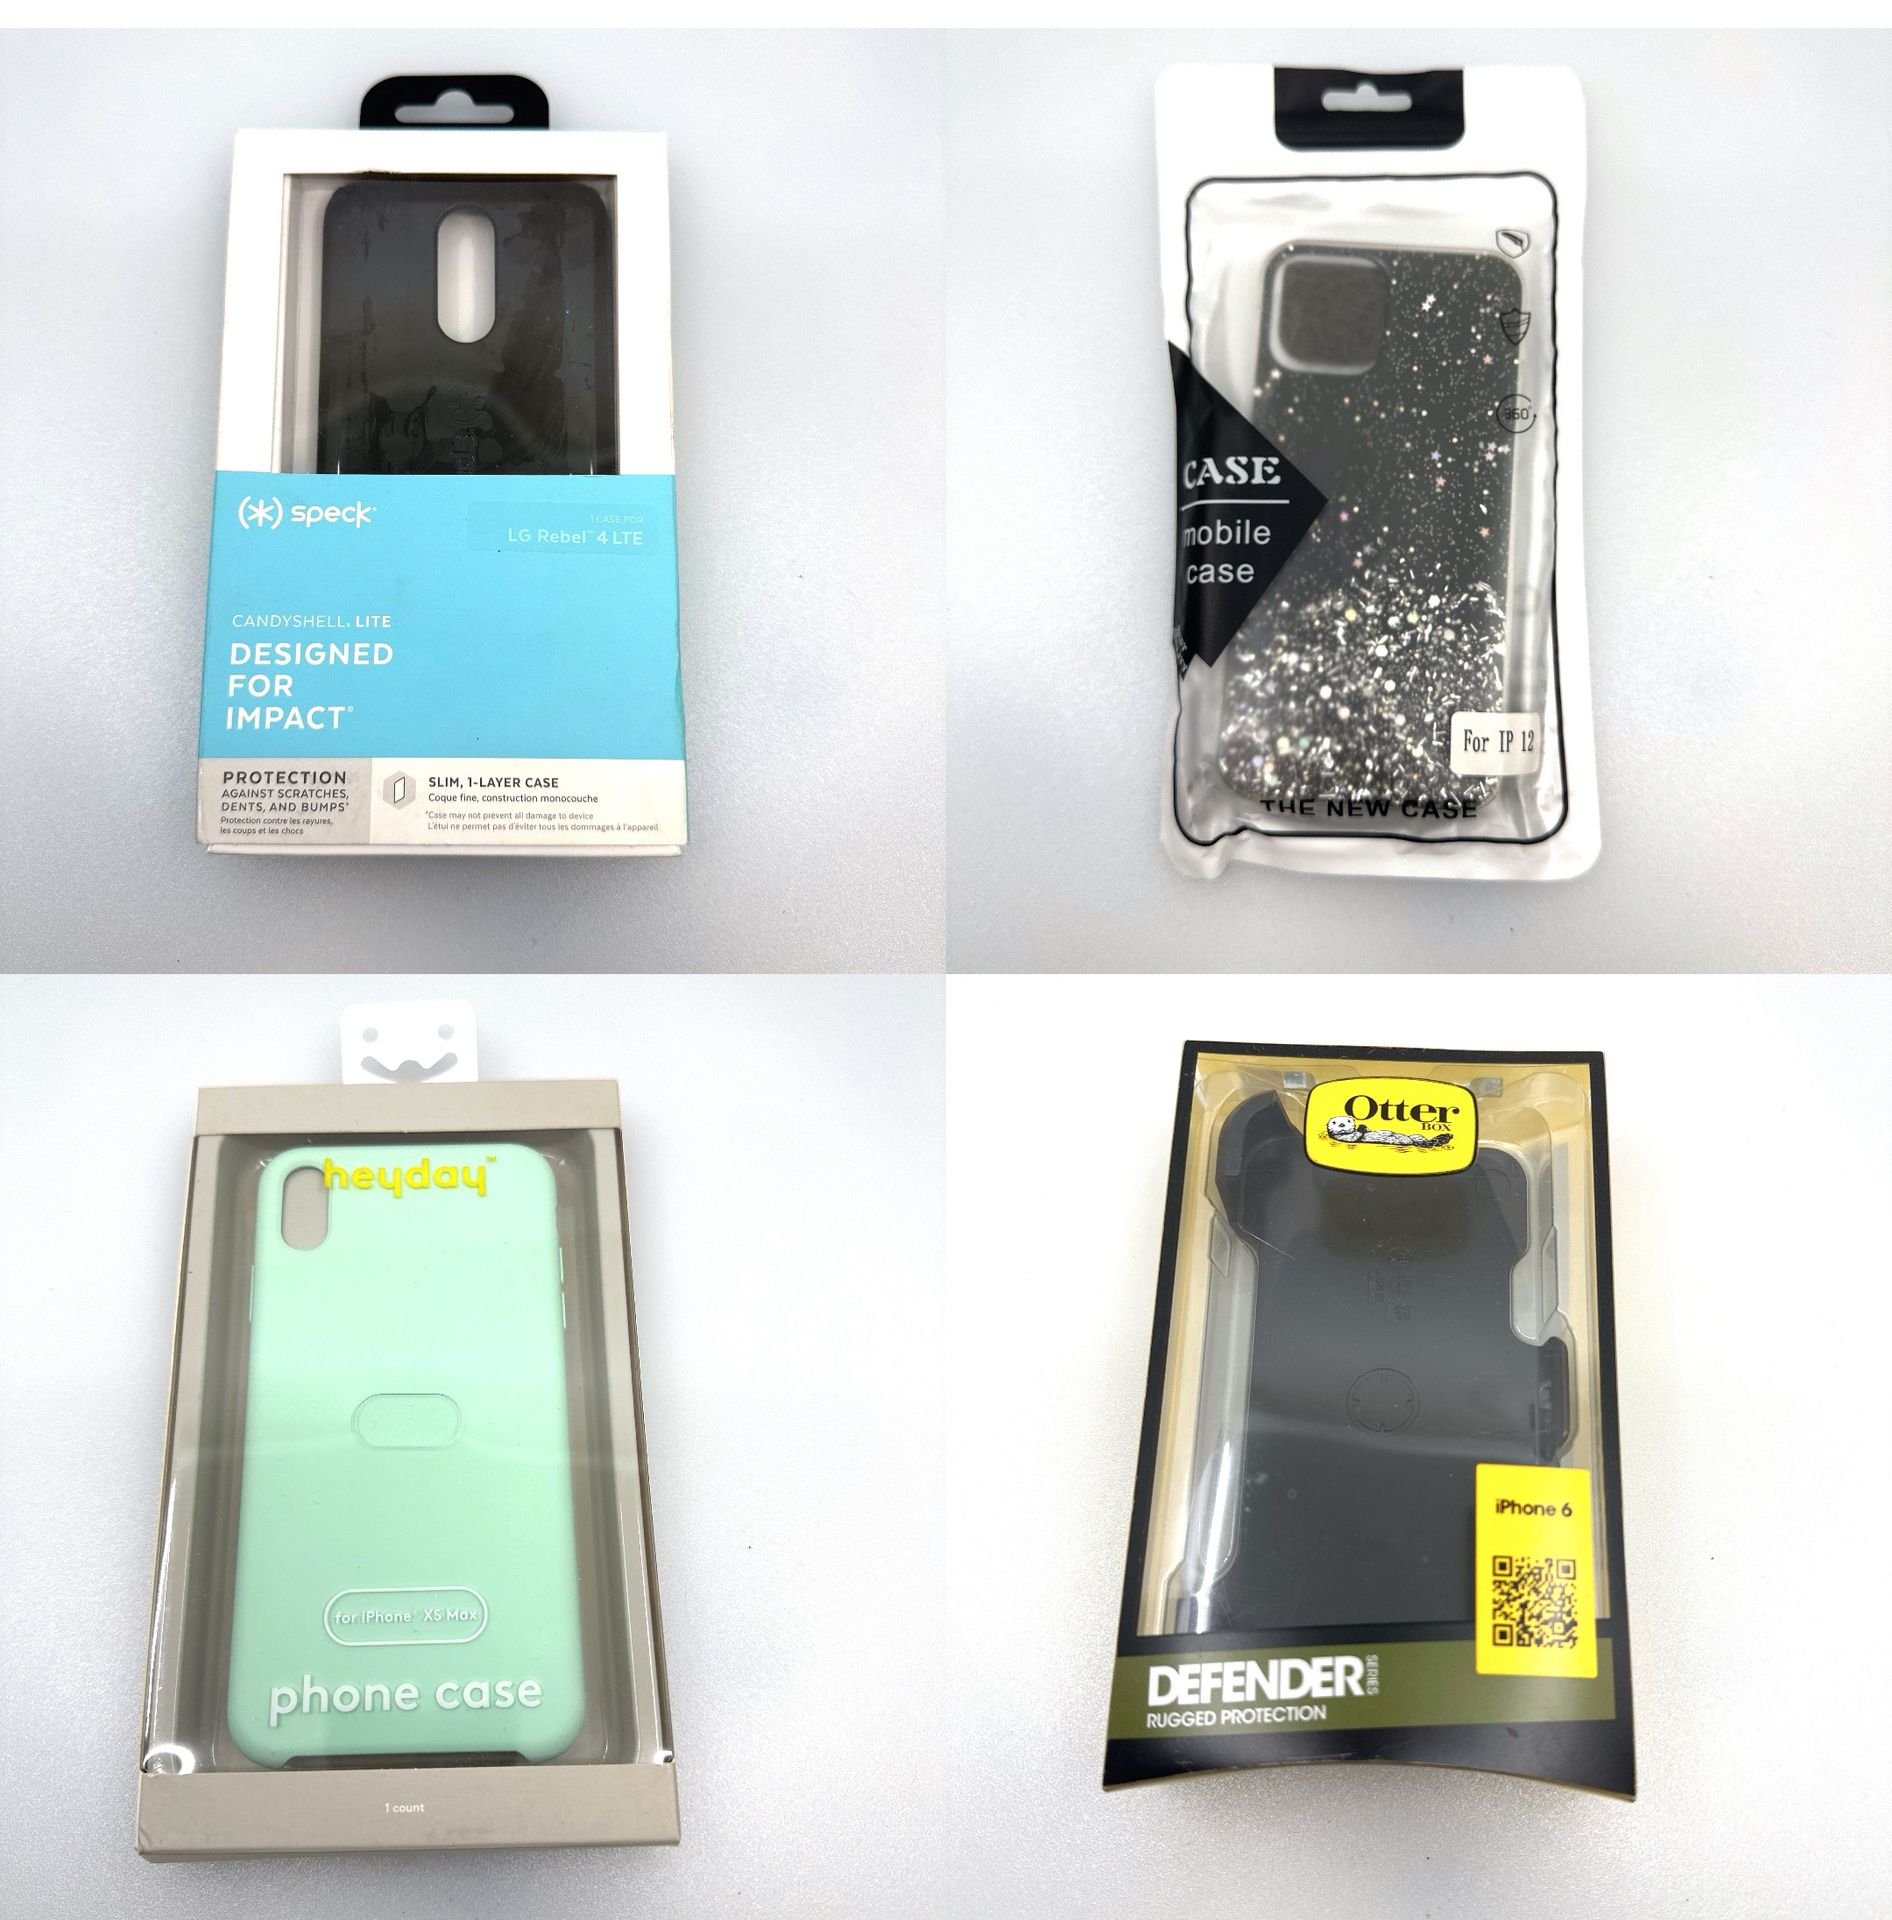 Phone Cases for iPhones 6 and XS Max, LG Rebel, & J2 Dash